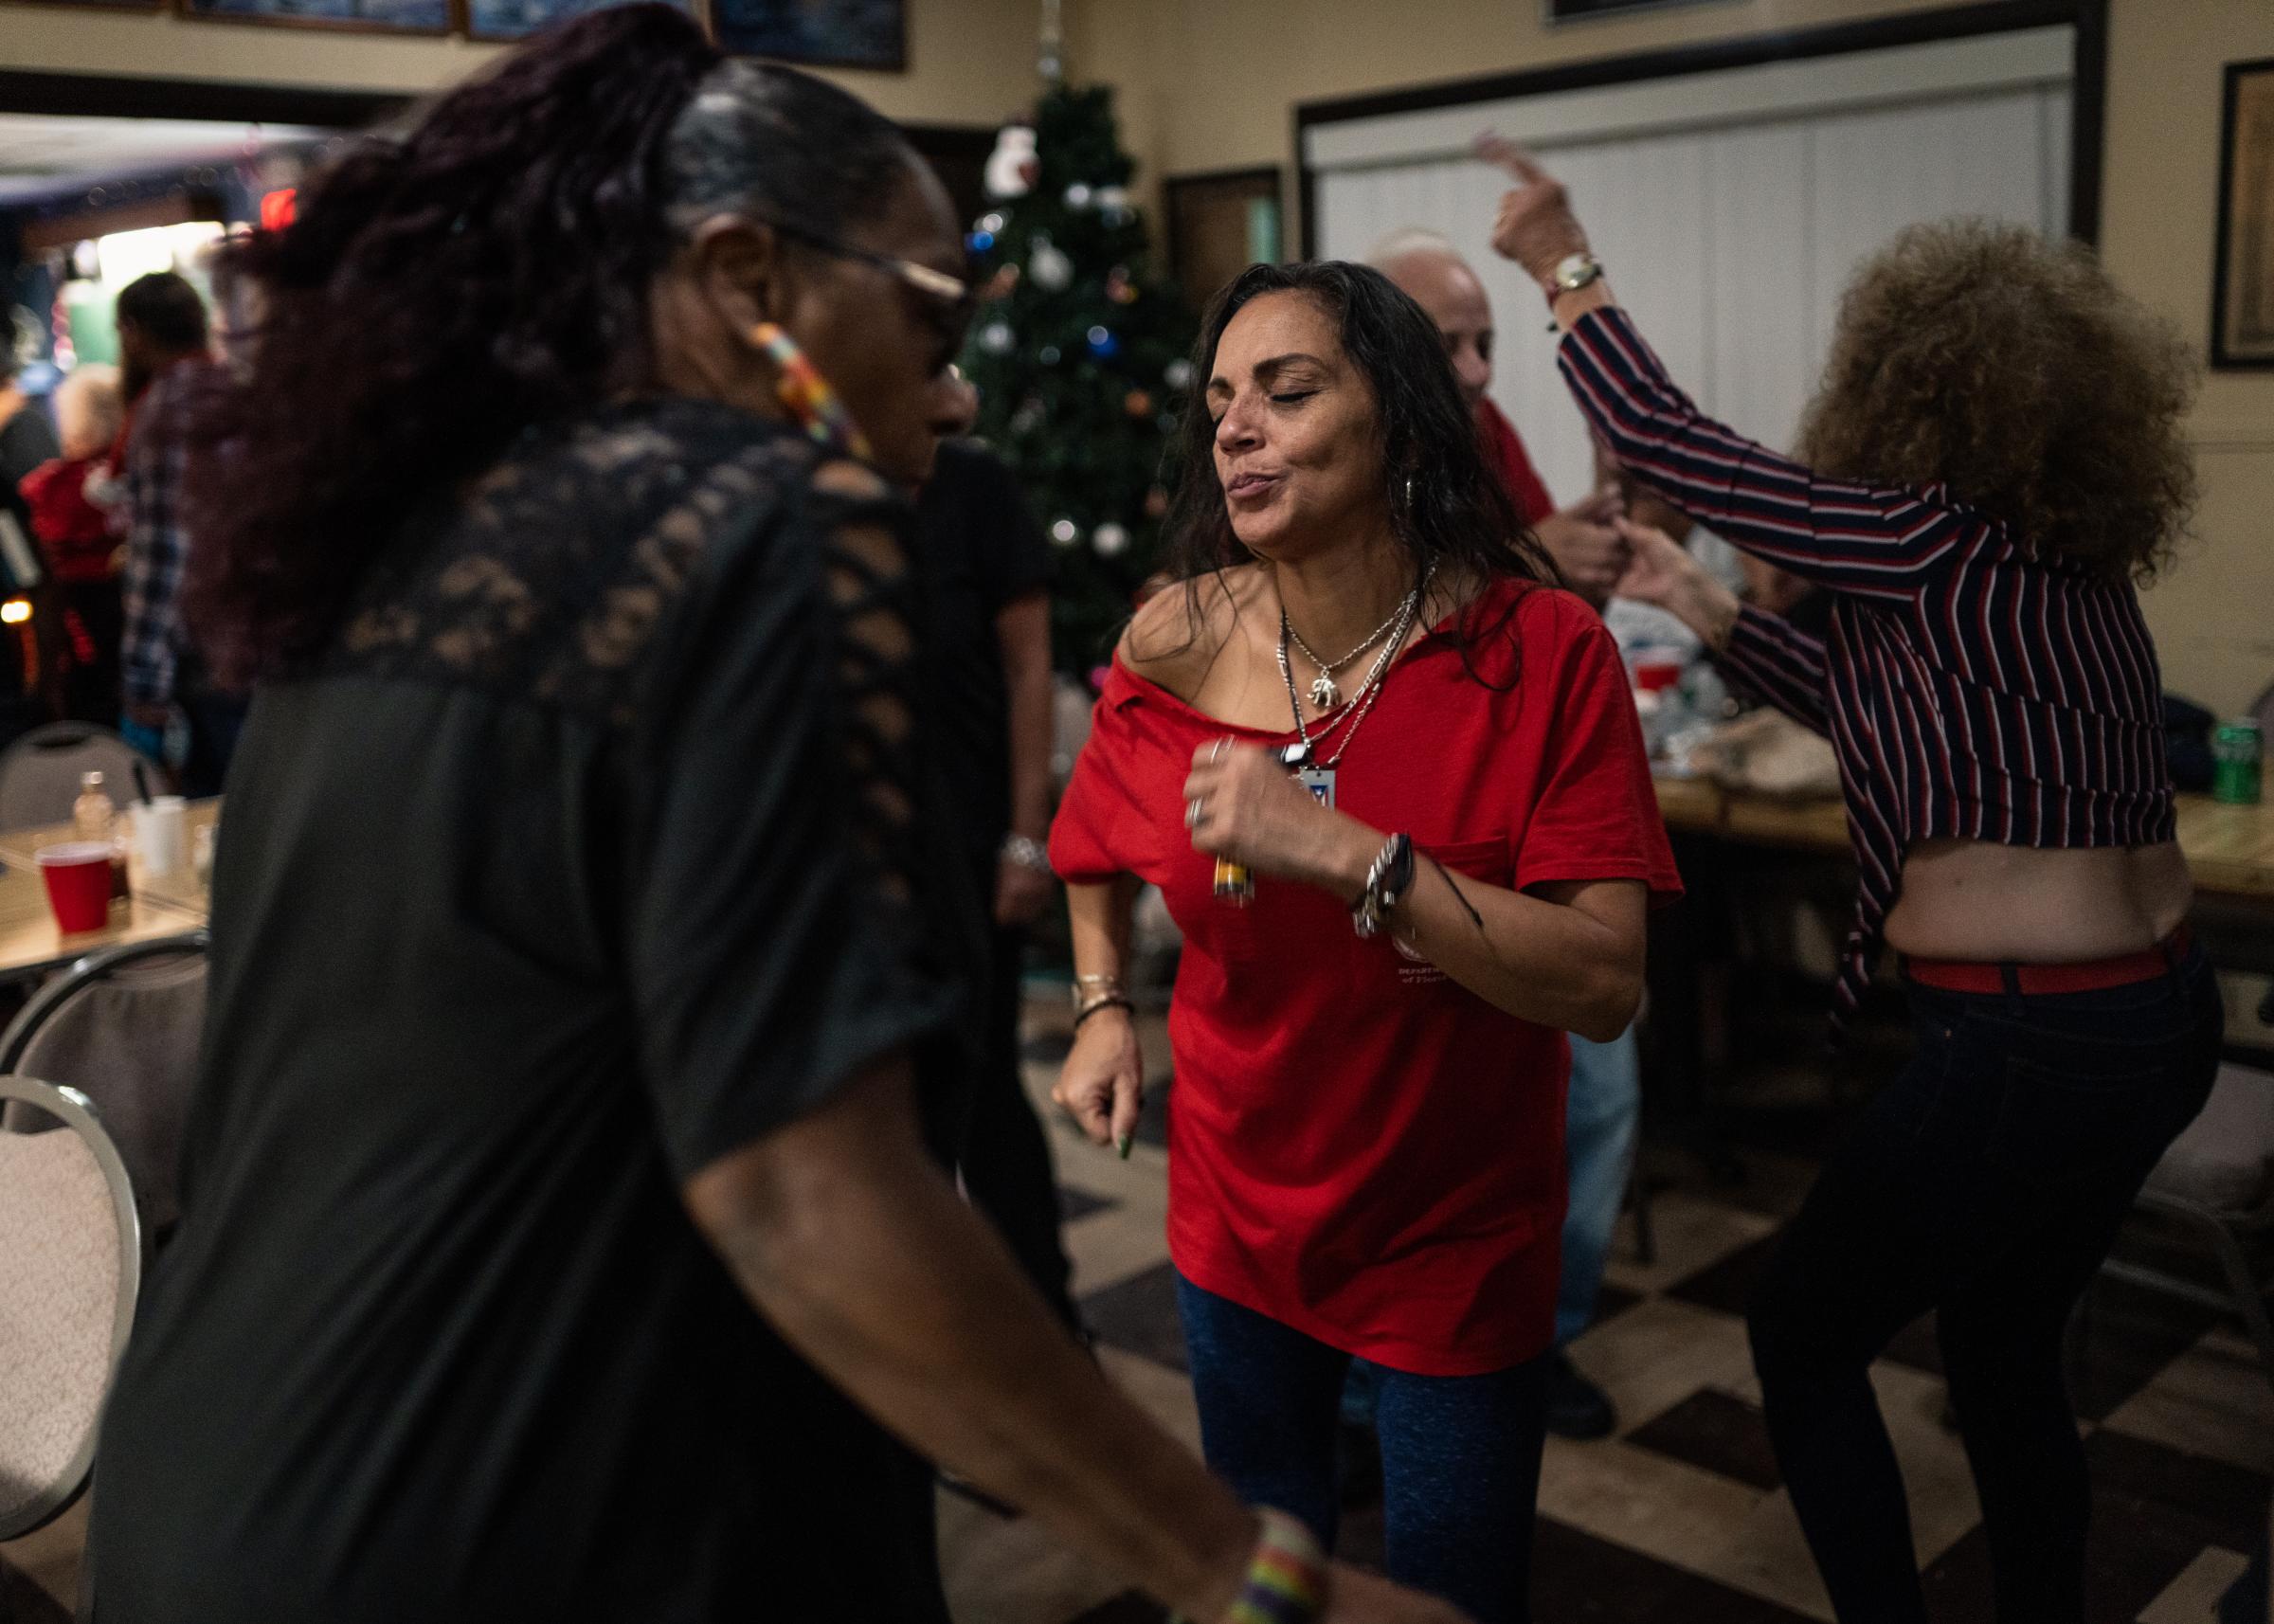 Post 67: American Legion, American Stories - On December 16, 2022, the post annual holiday party included a shrimp dinner and a live band. As...